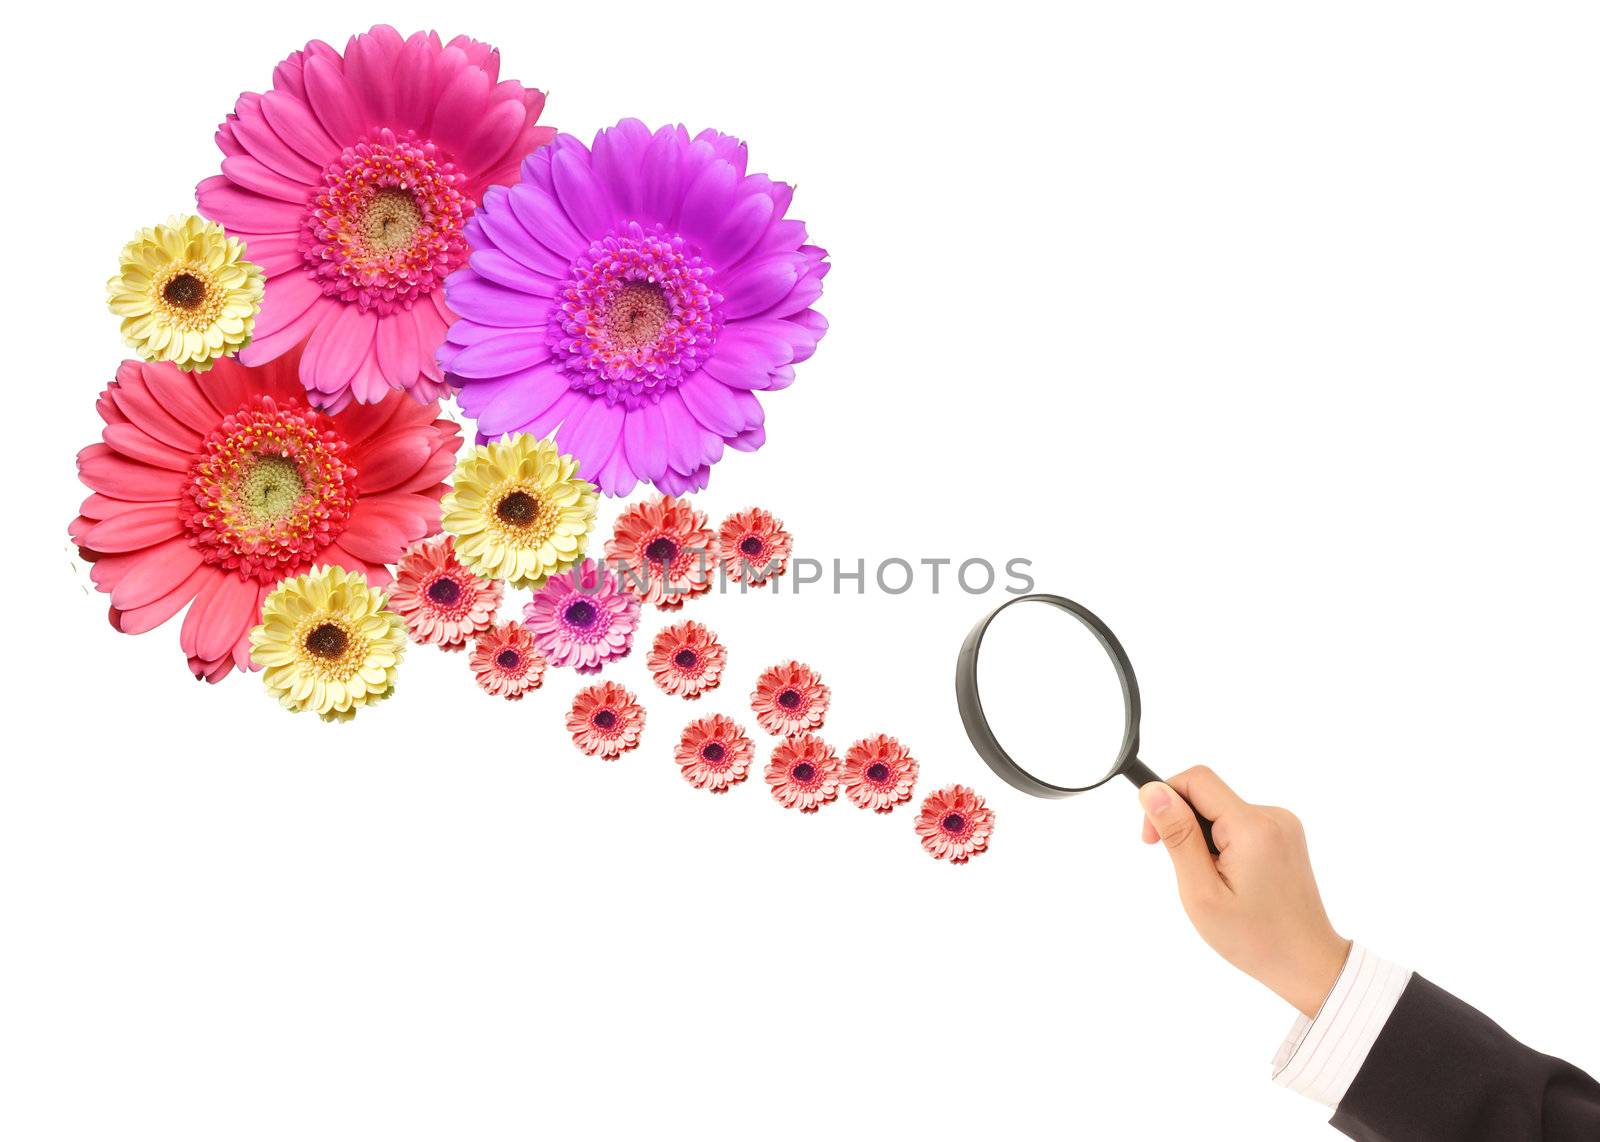 flower and magnifying glass on a white background. by rufous